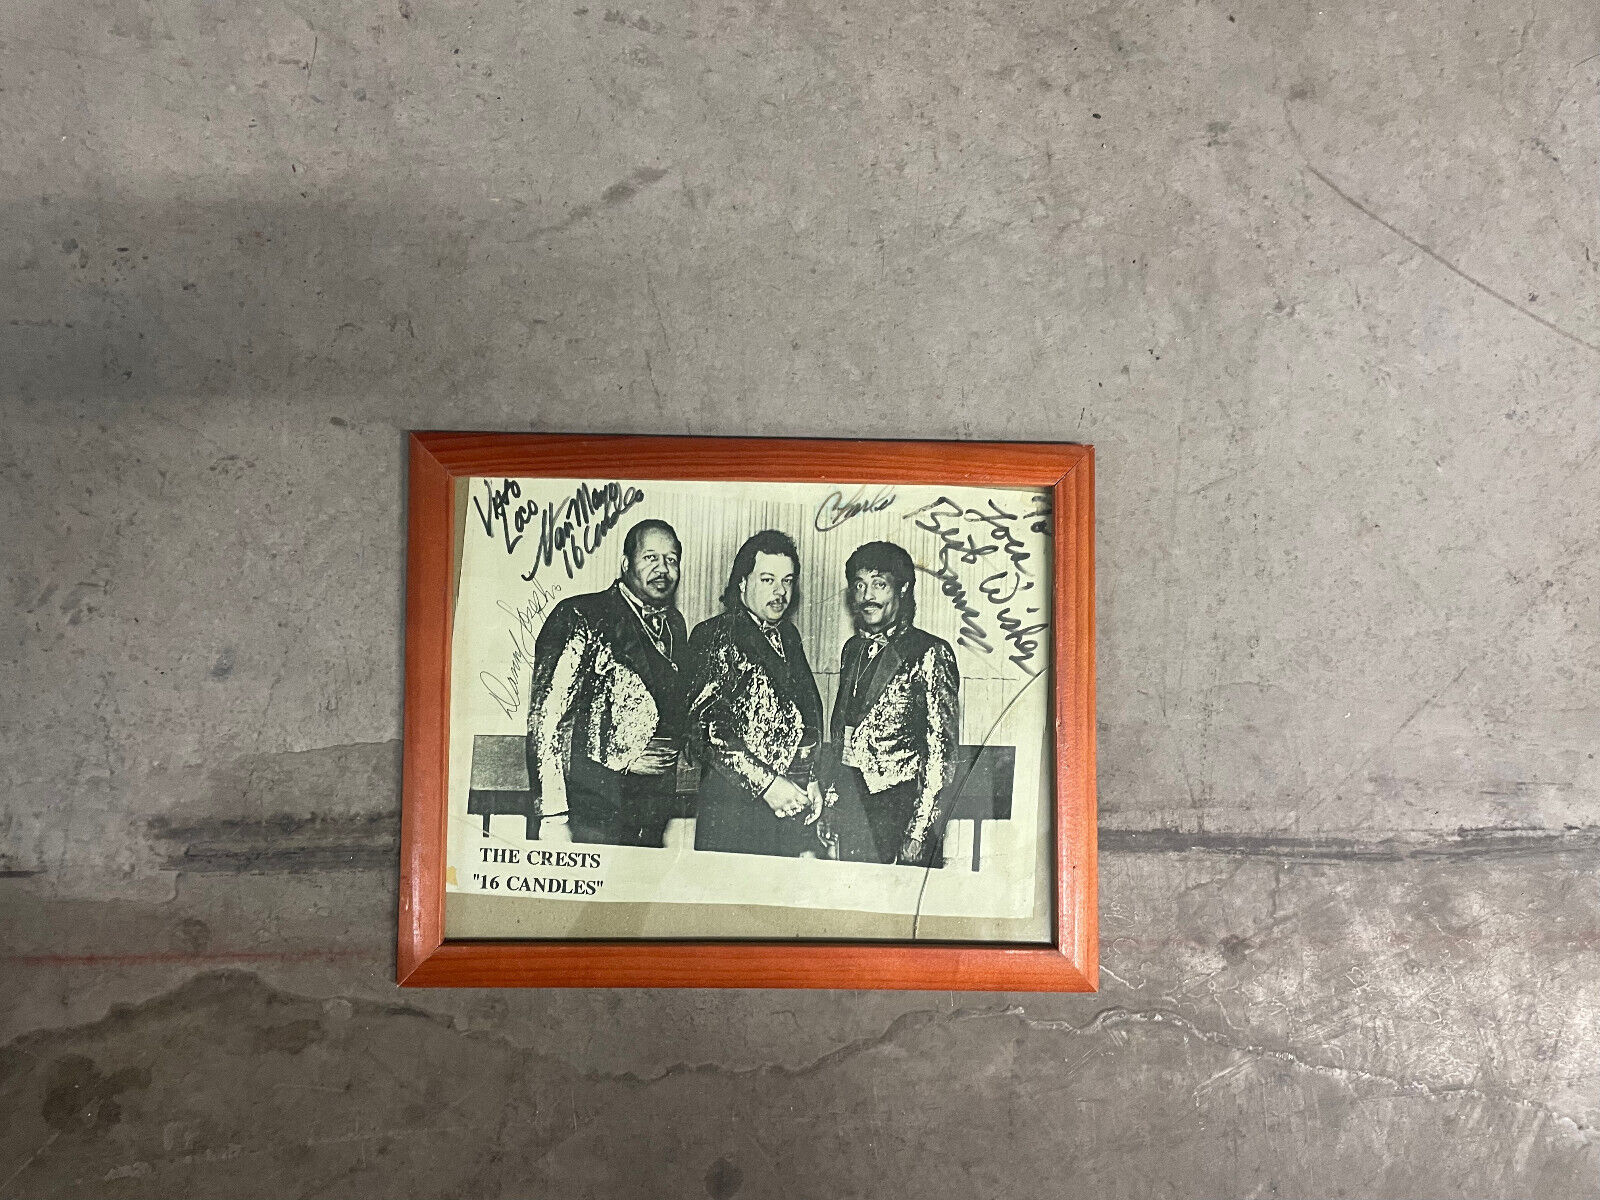 'The Crests' Song 16 Candles Signed Picture Frame